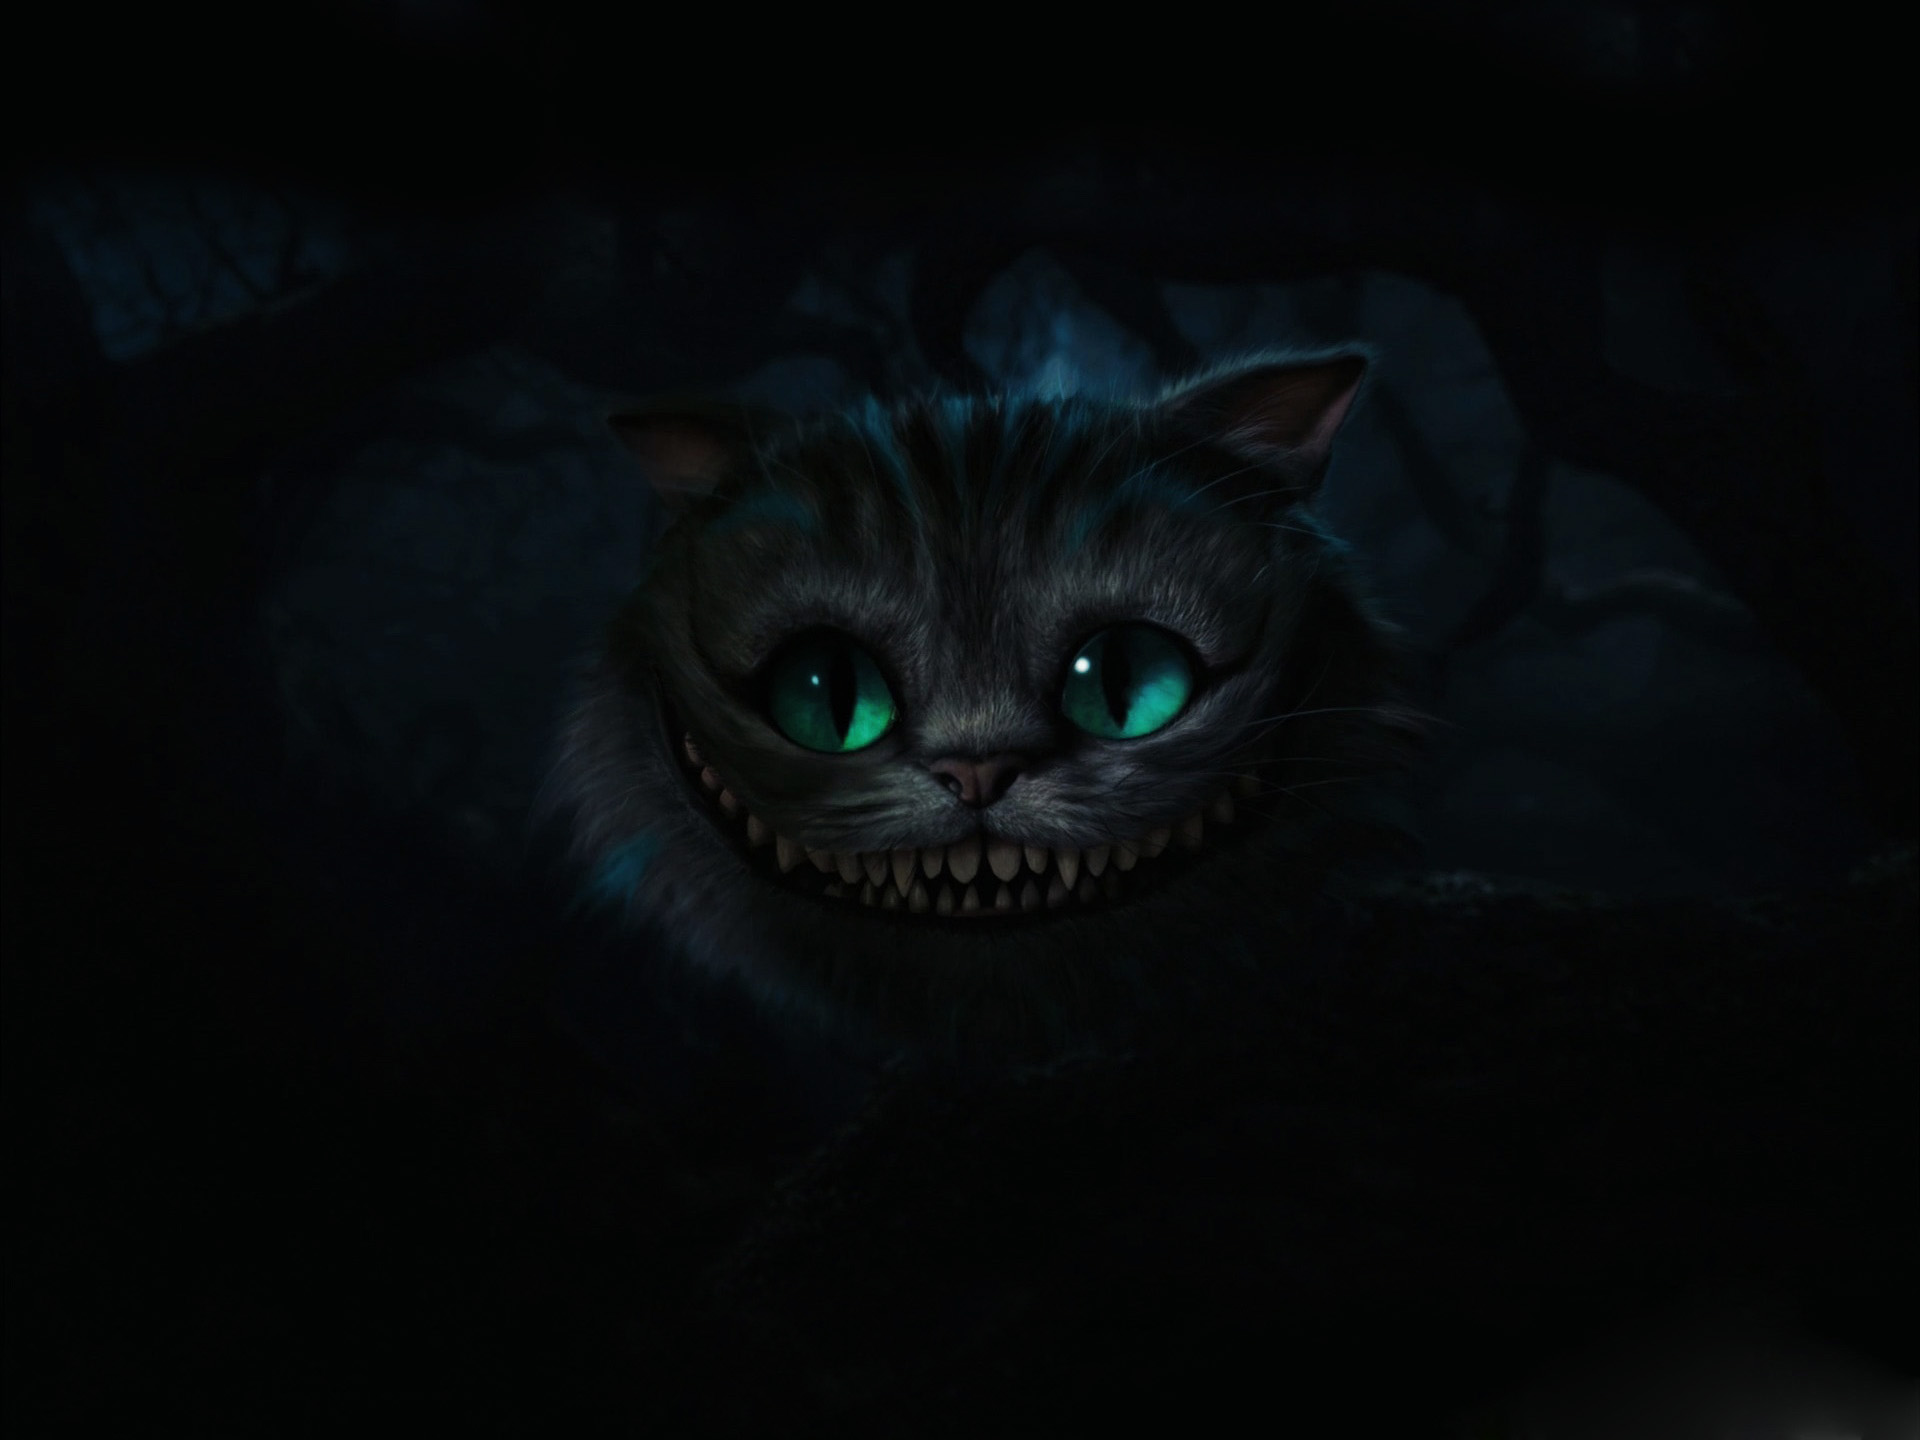 a cat with big green eyes in the dark